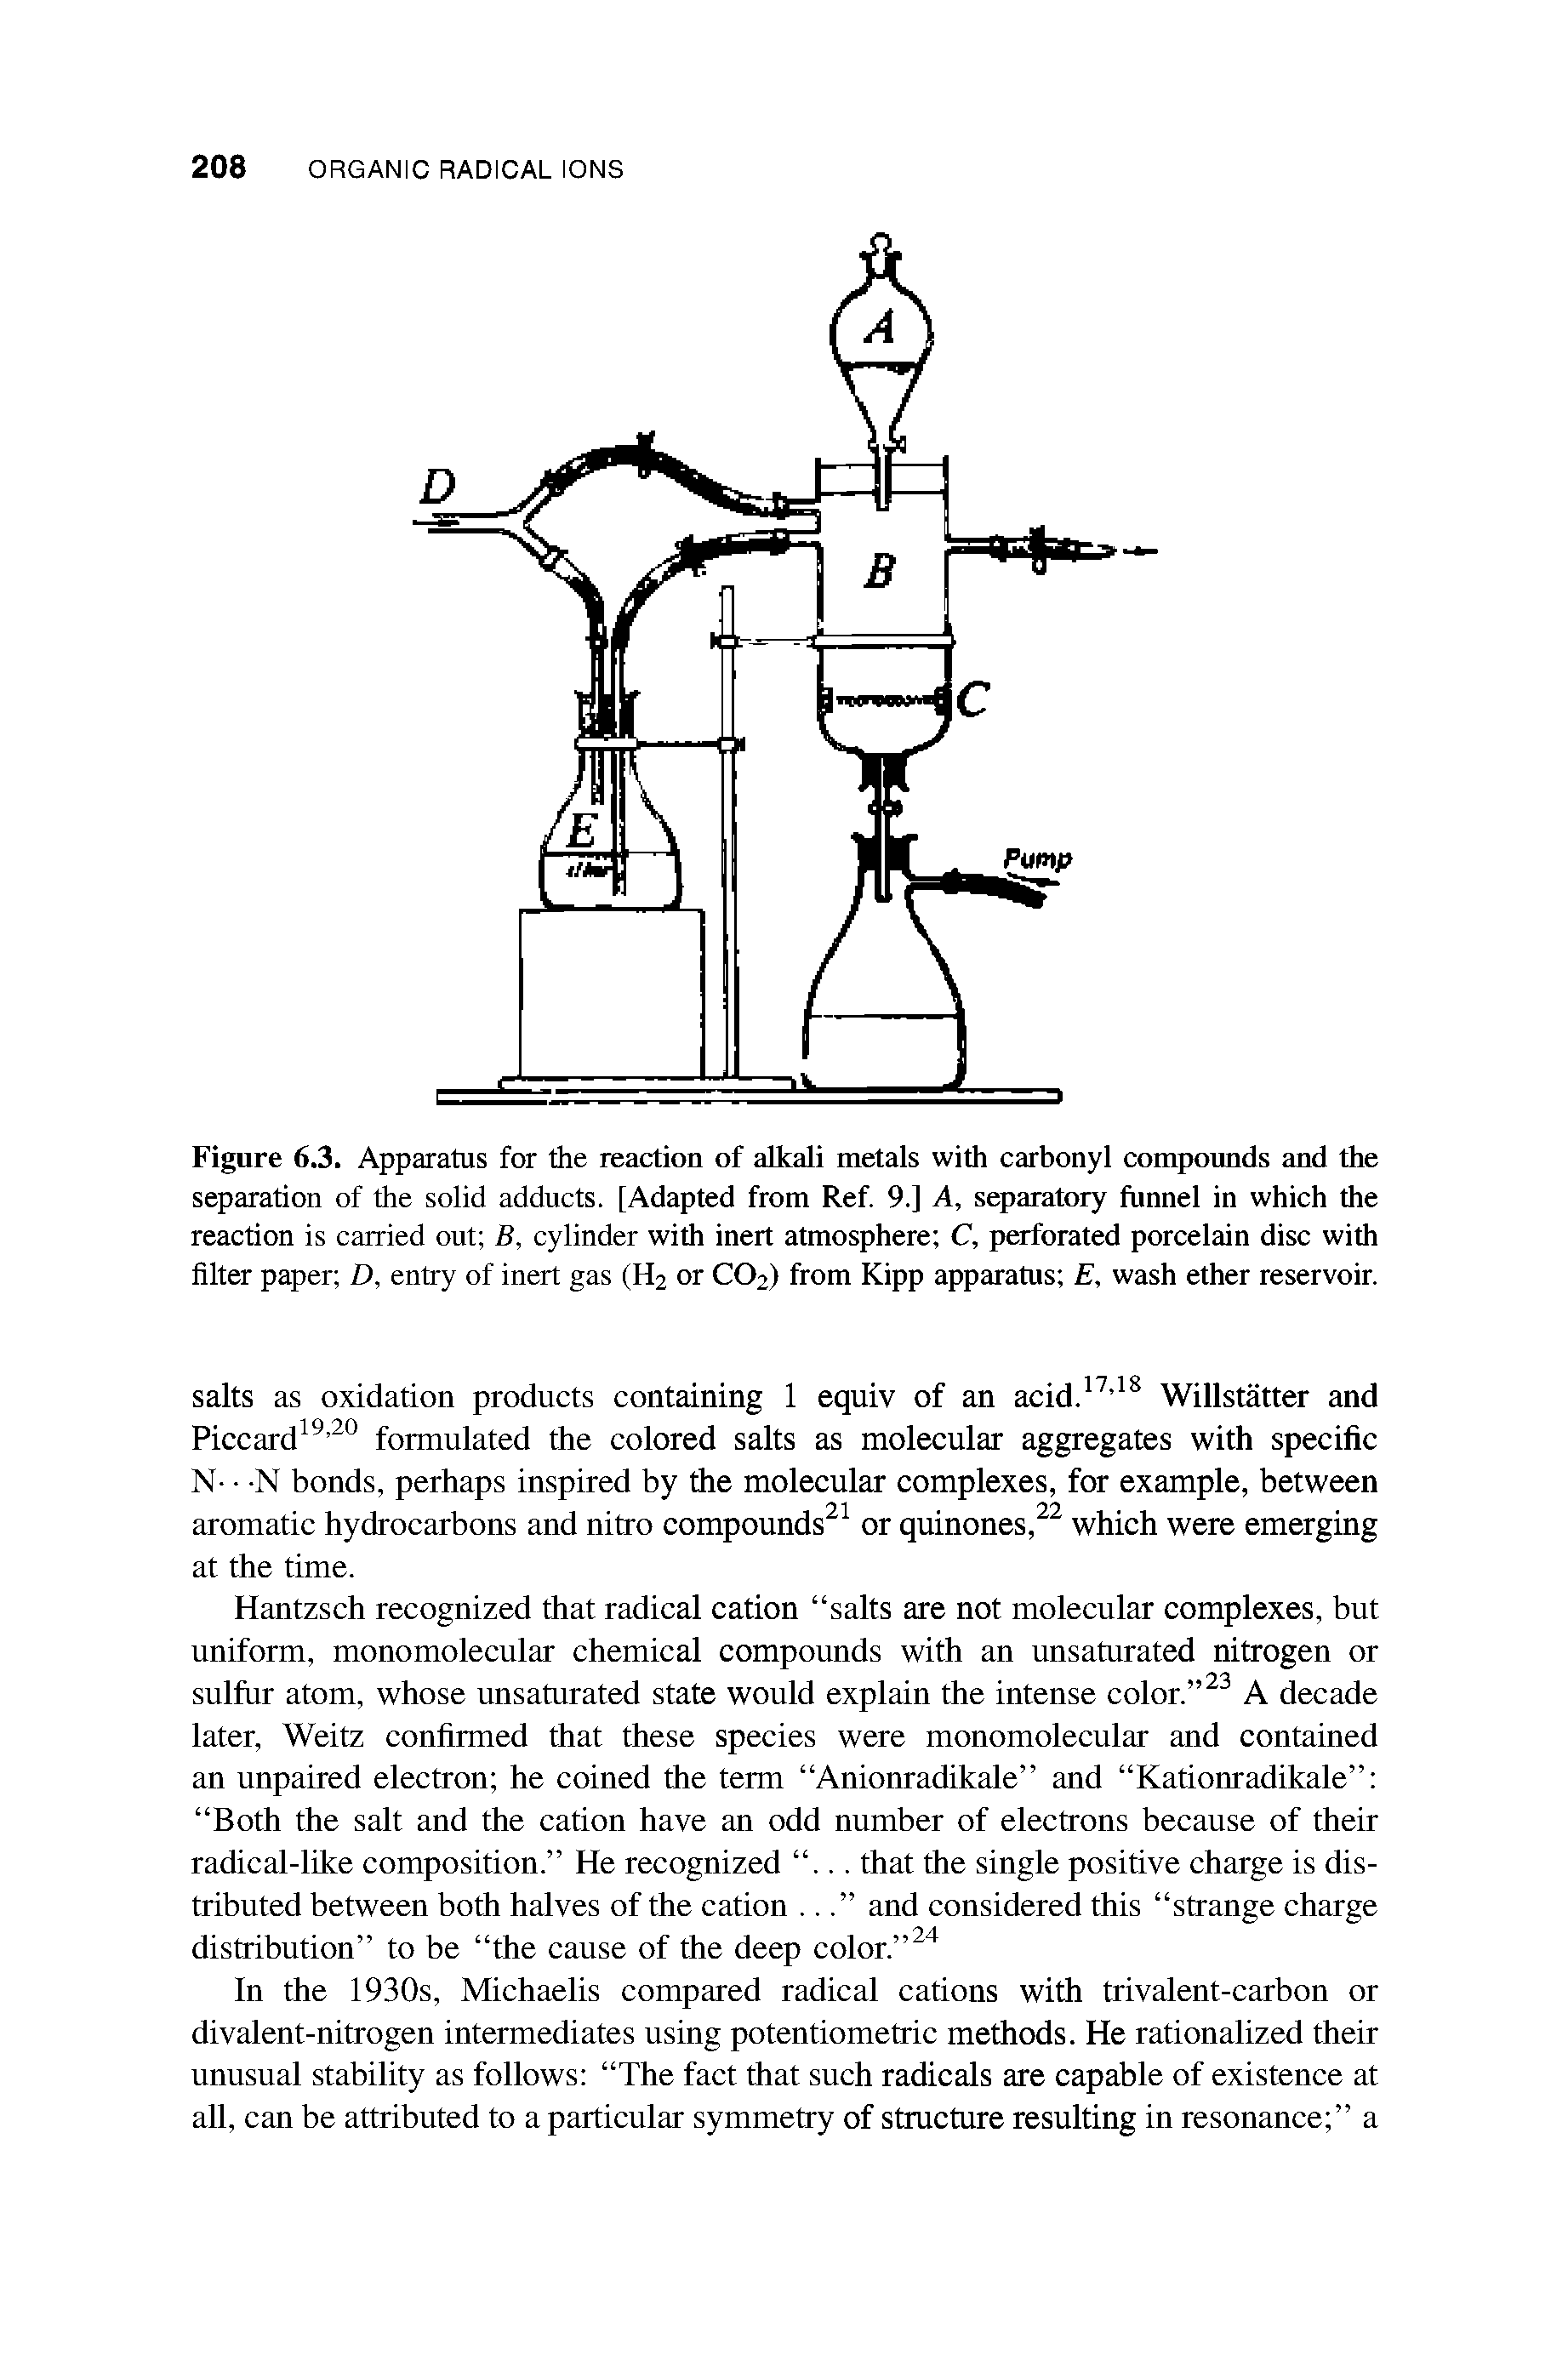 Figure 6.3. Apparatus for the reaction of alkali metals with carbonyl compounds and the separation of the solid adducts. [Adapted from Ref. 9.] A, separatory funnel in which the reaction is carried out B, cylinder with inert atmosphere C, perforated porcelain disc with filter paper D, entry of inert gas (H2 or CO2) from Kipp apparatus E, wash ether reservoir.